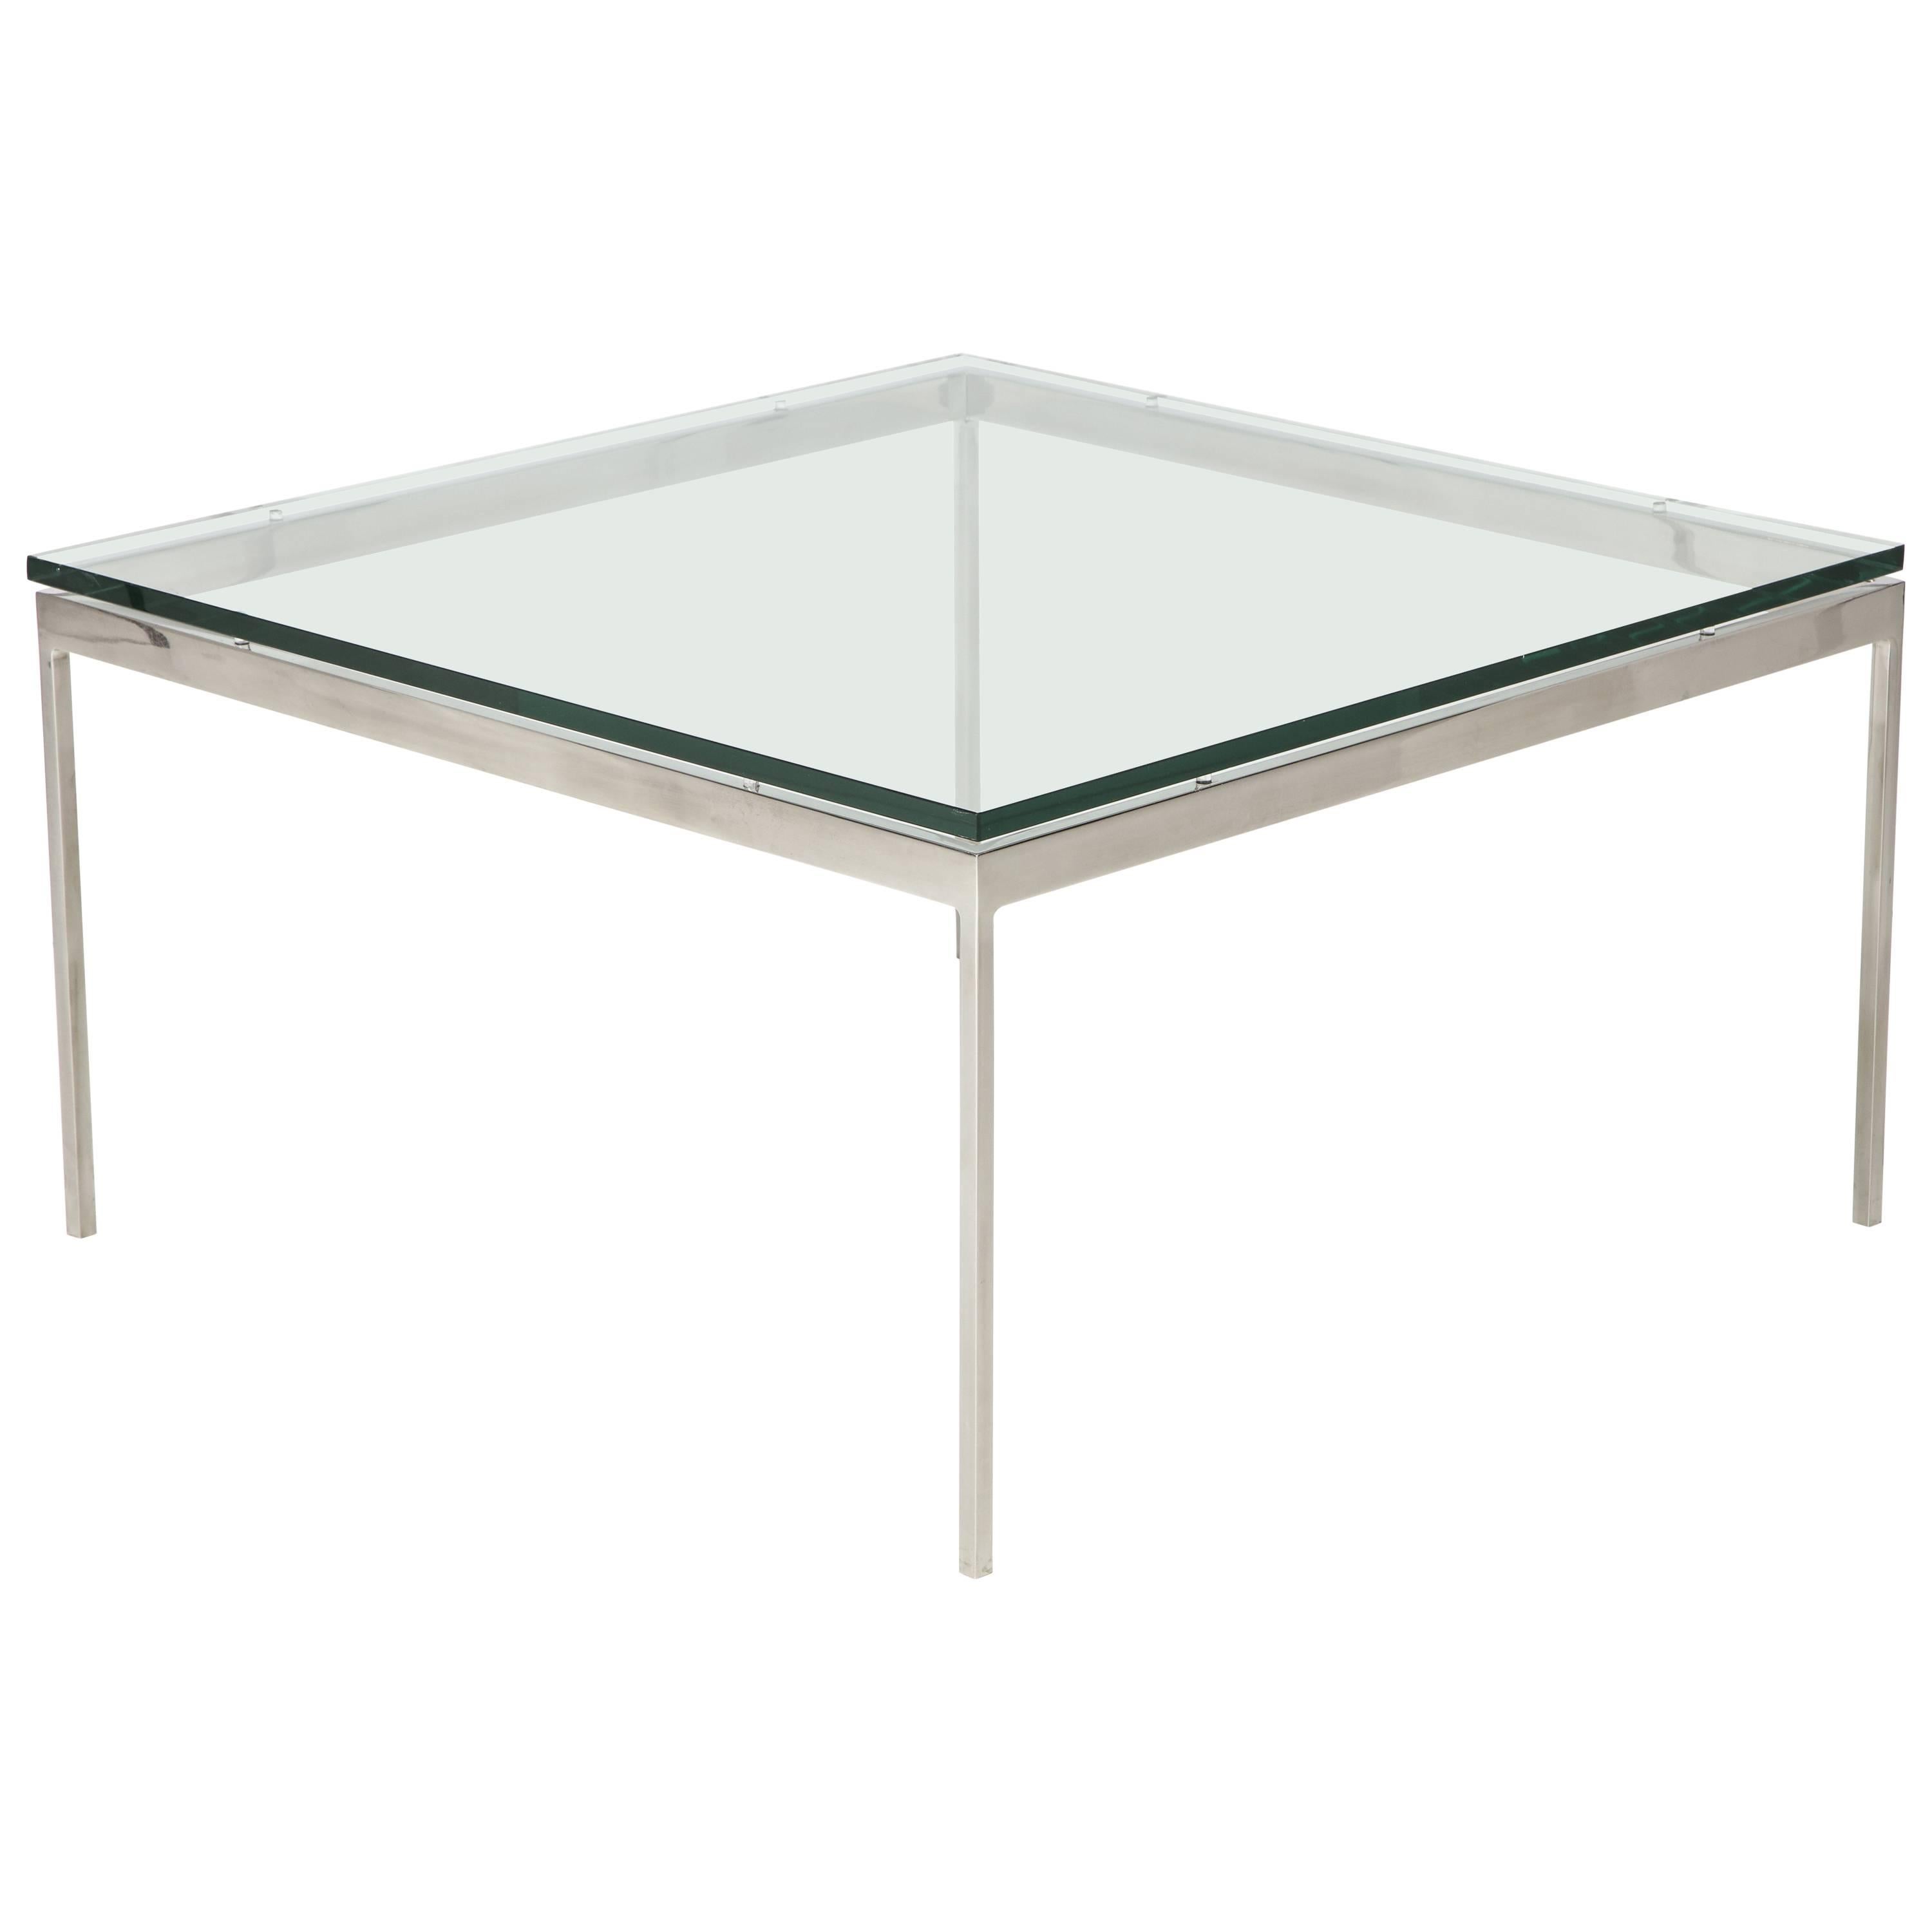 Nicos Zographos 35 Series Cocktail Table For Sale